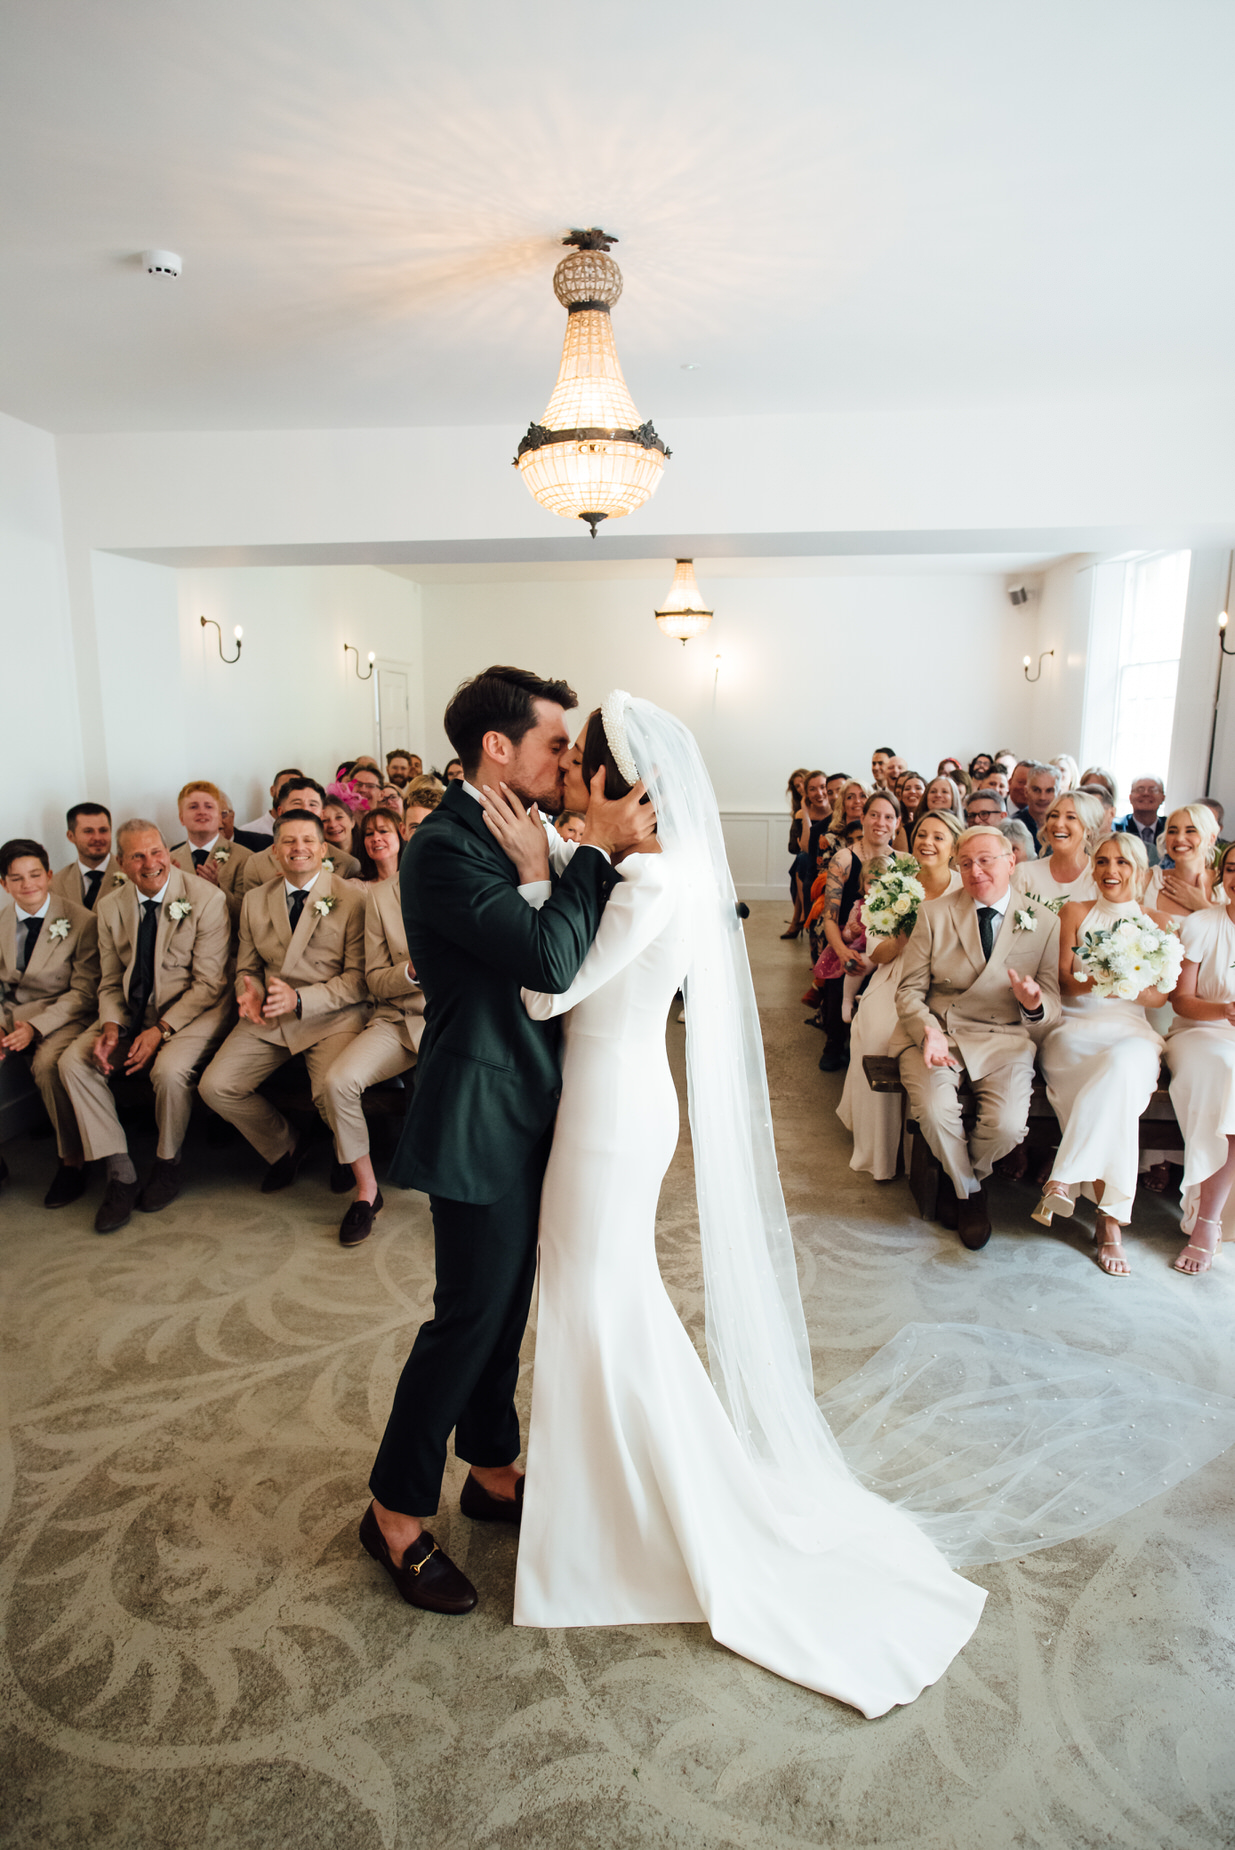 first kiss, reportage wedding photos, authentic wedding photography, Aswarby Rectory Wedding, michelle wood photographer